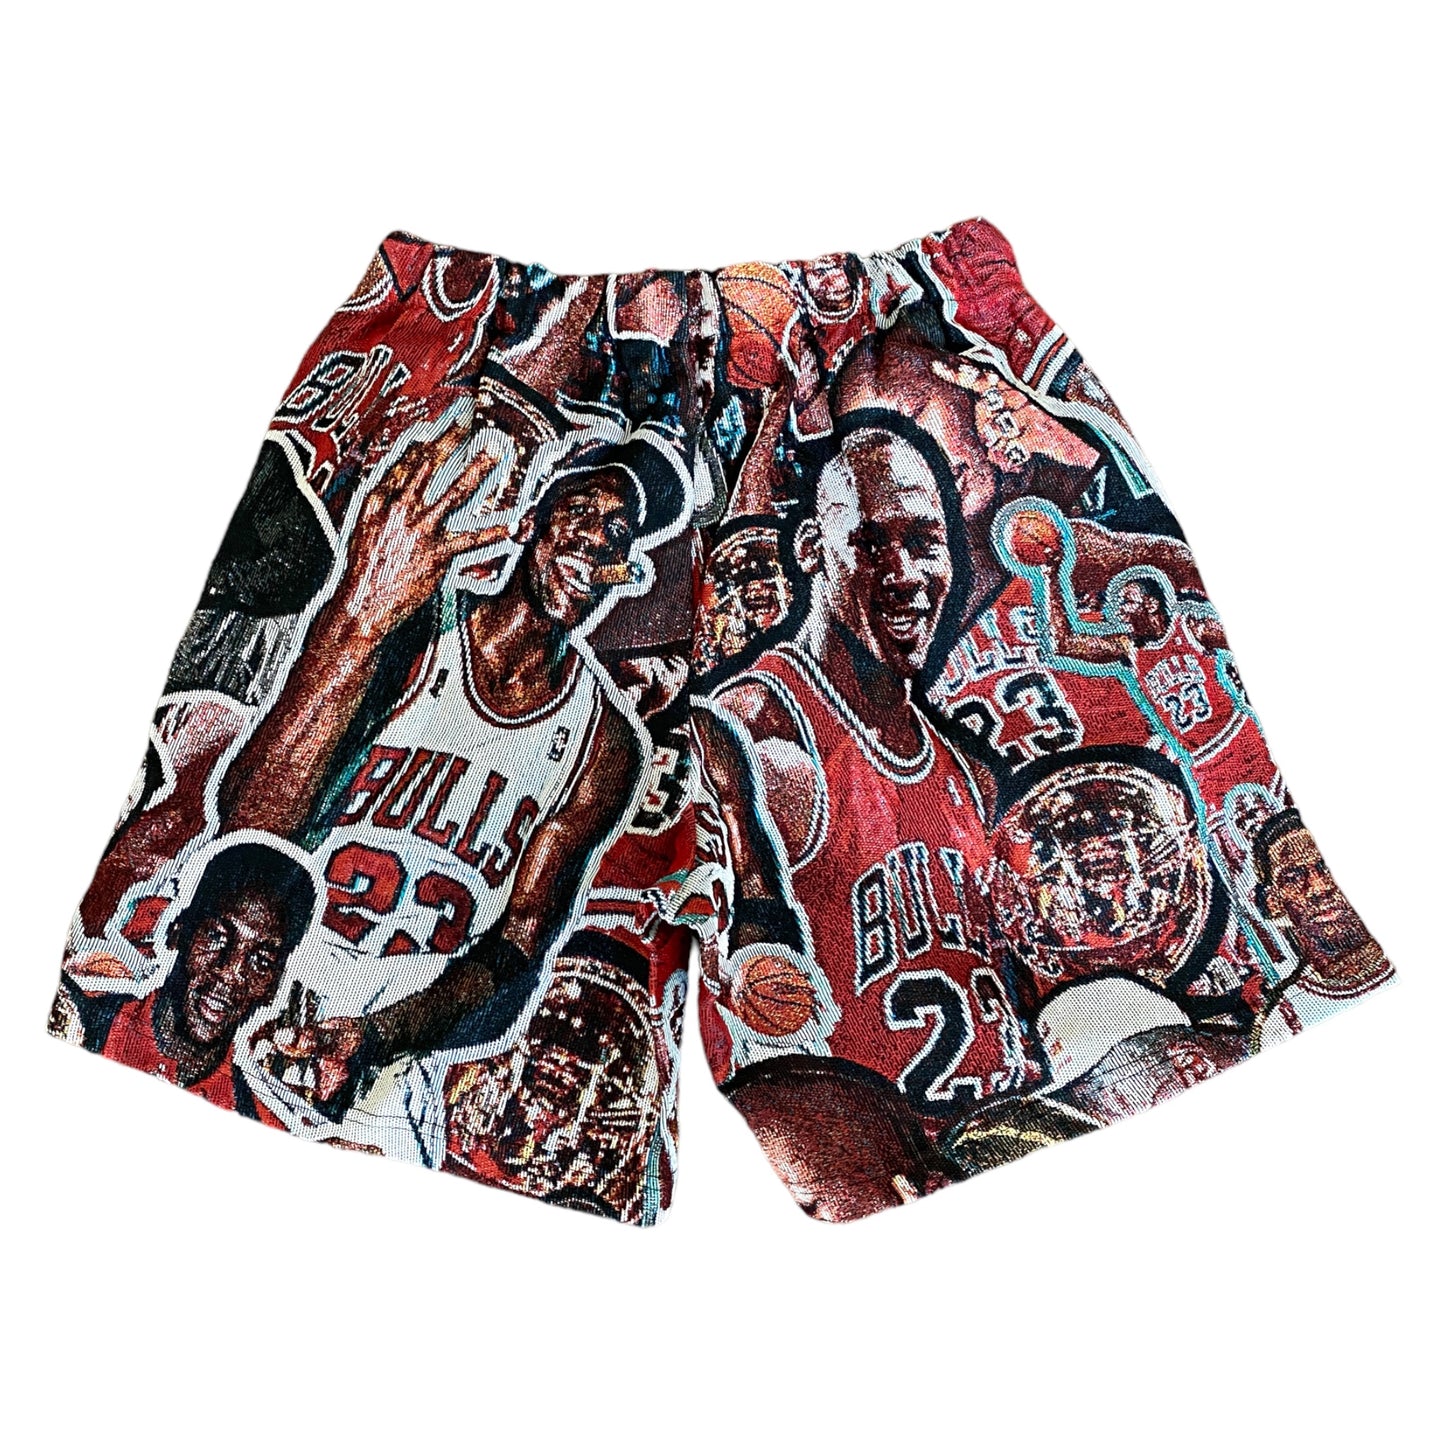 Jordan Tribute Knitted Shorts *LIMITED EDITION*